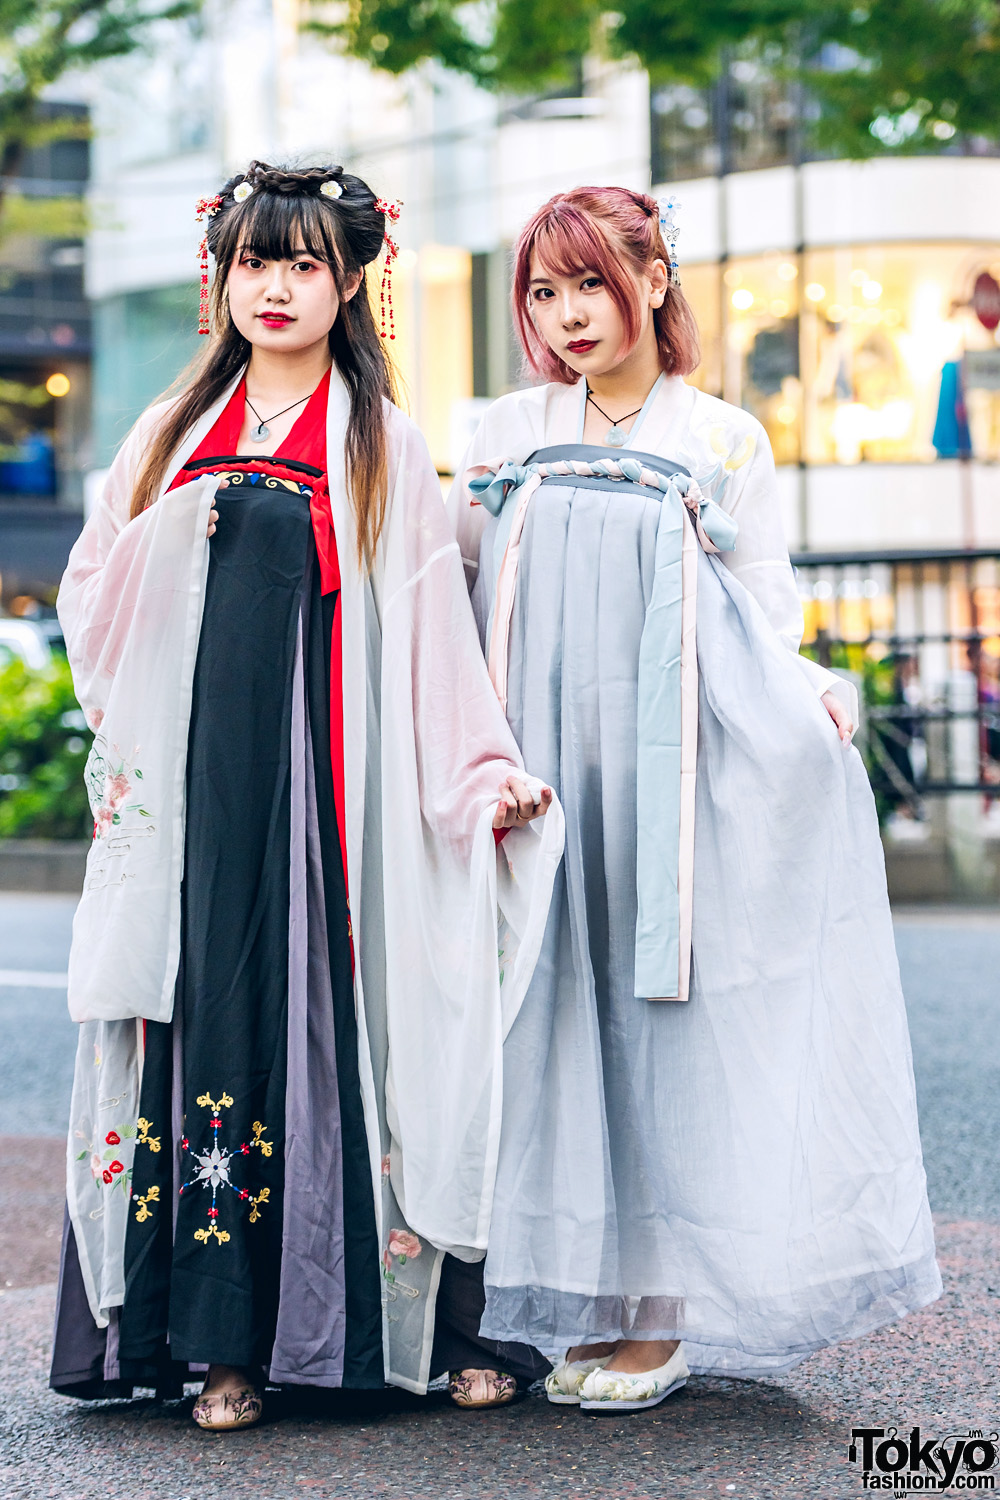 Traditional Chinese Hanfu Dresses & Floral Hair Accessories on the Street in Harajuku